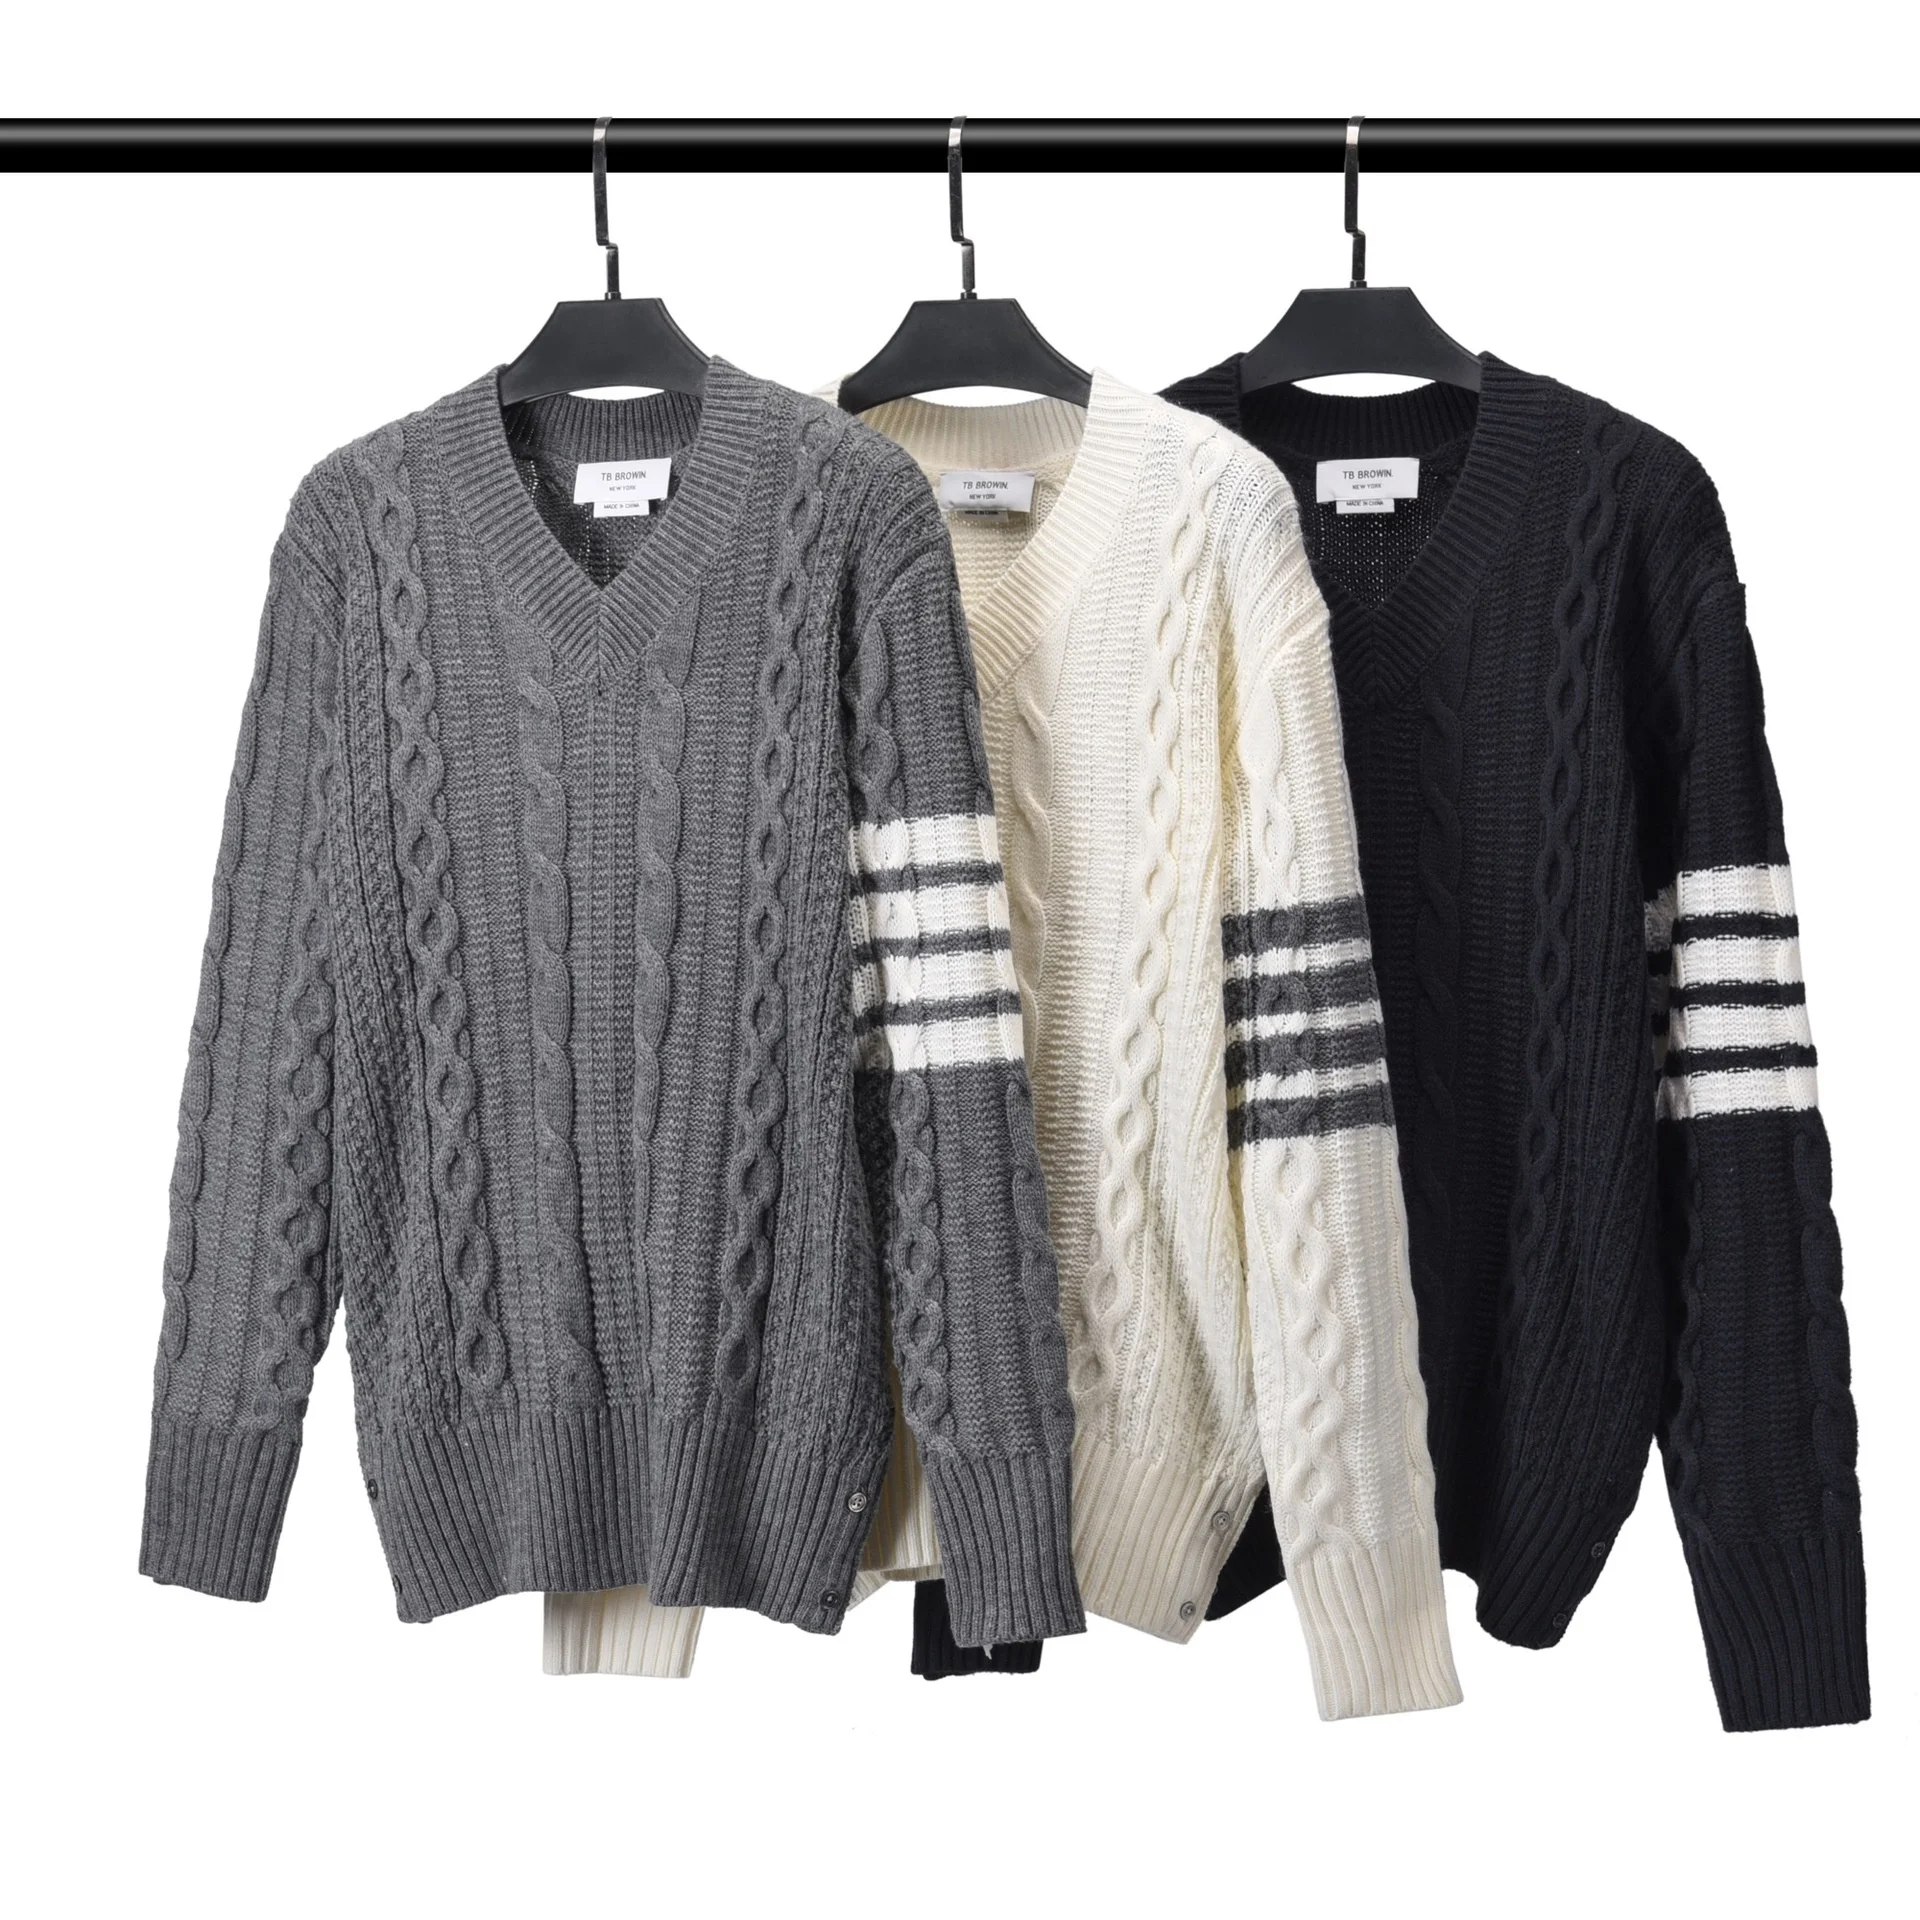 TB BROWIN Autumn Men Swater Wool Cardigan Striped V-Neck Pullover High Quality Casual Knitting Women Top Winter SweatShirt